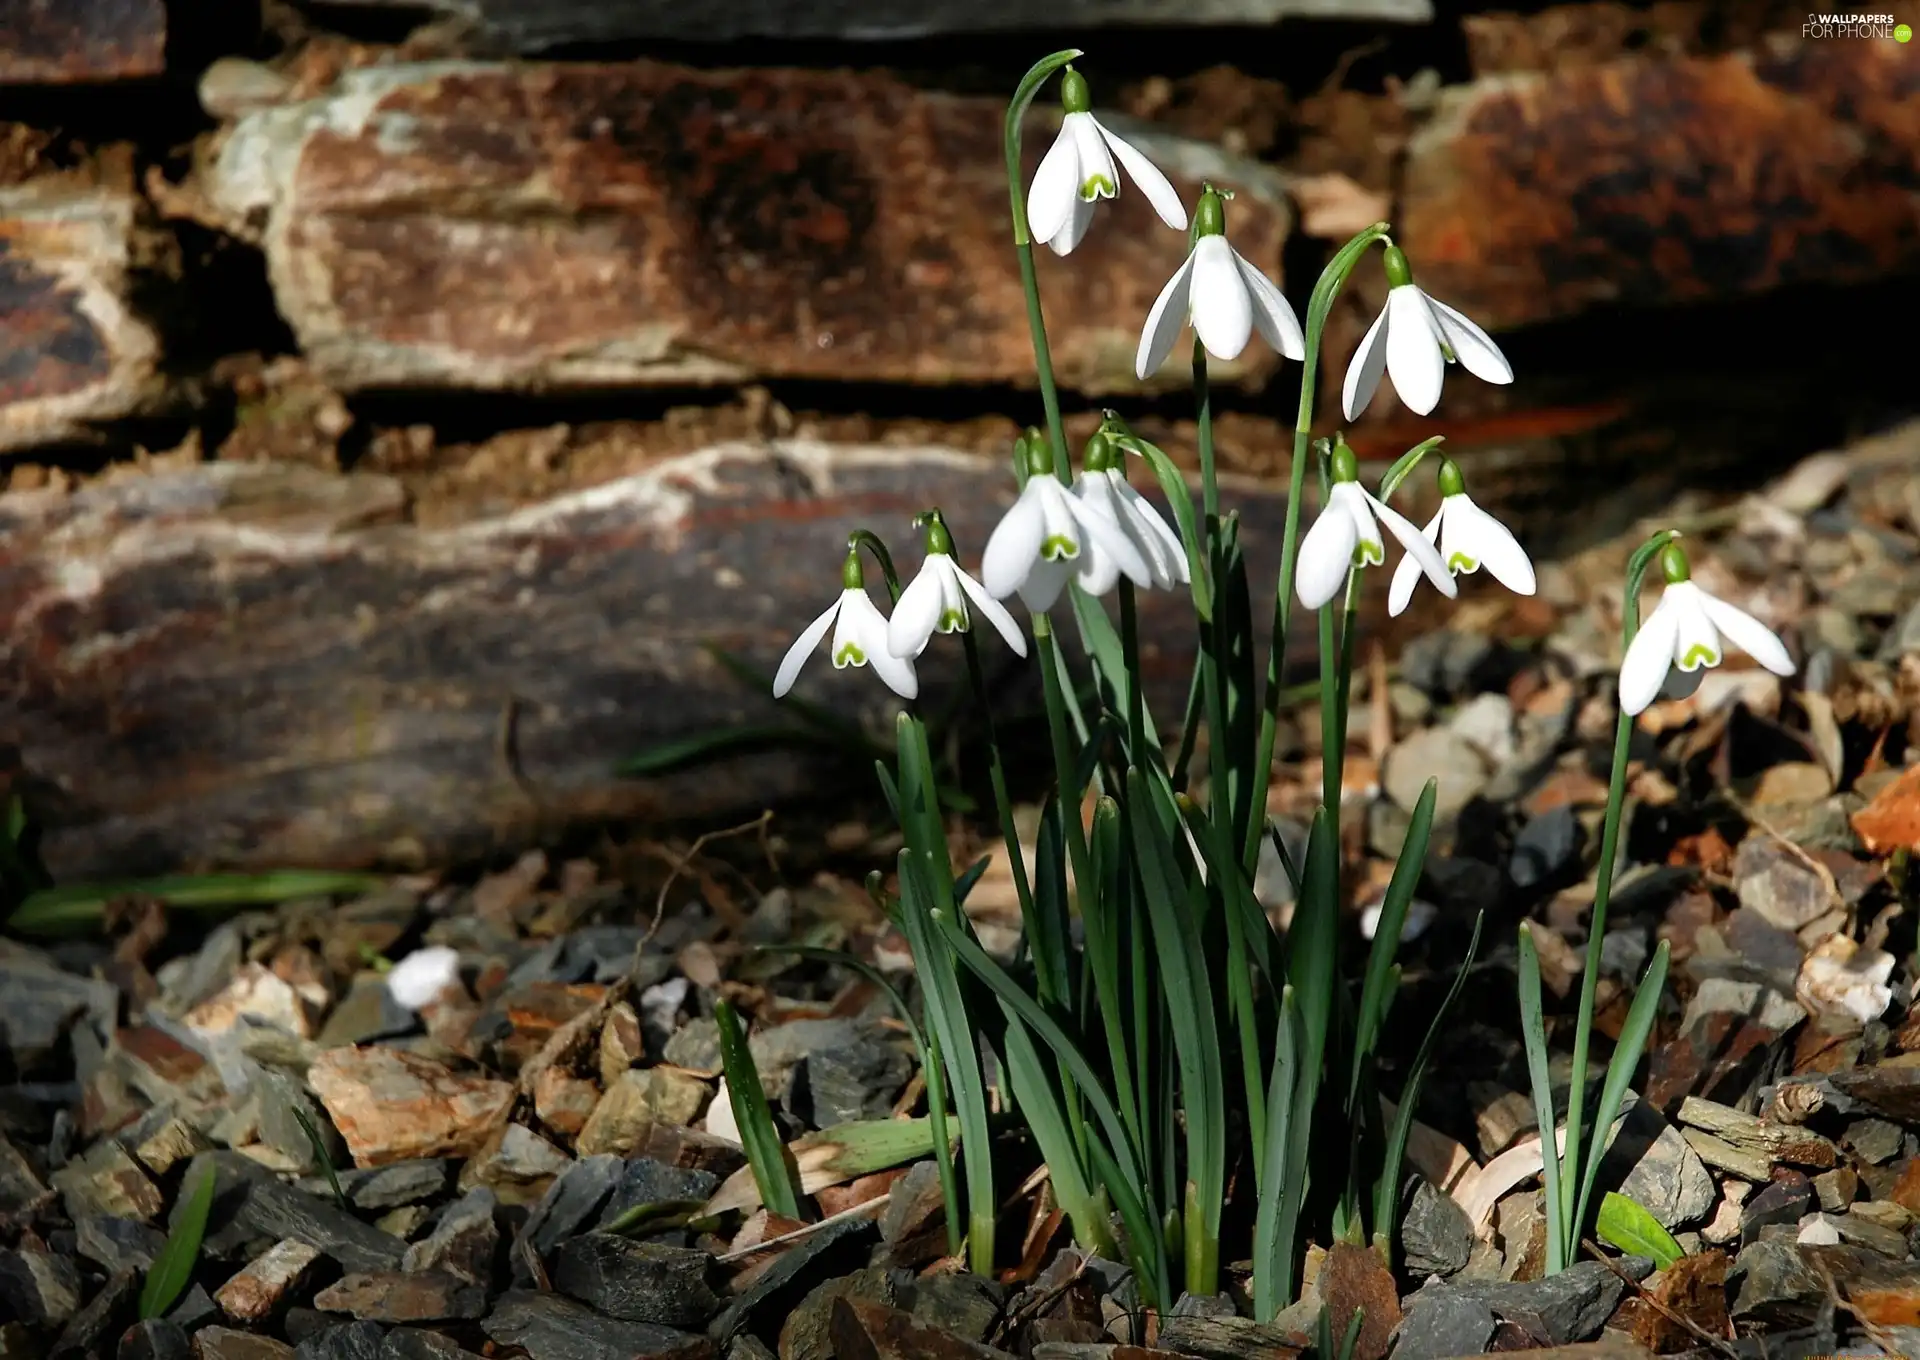 snowdrops, Spring, Flowers